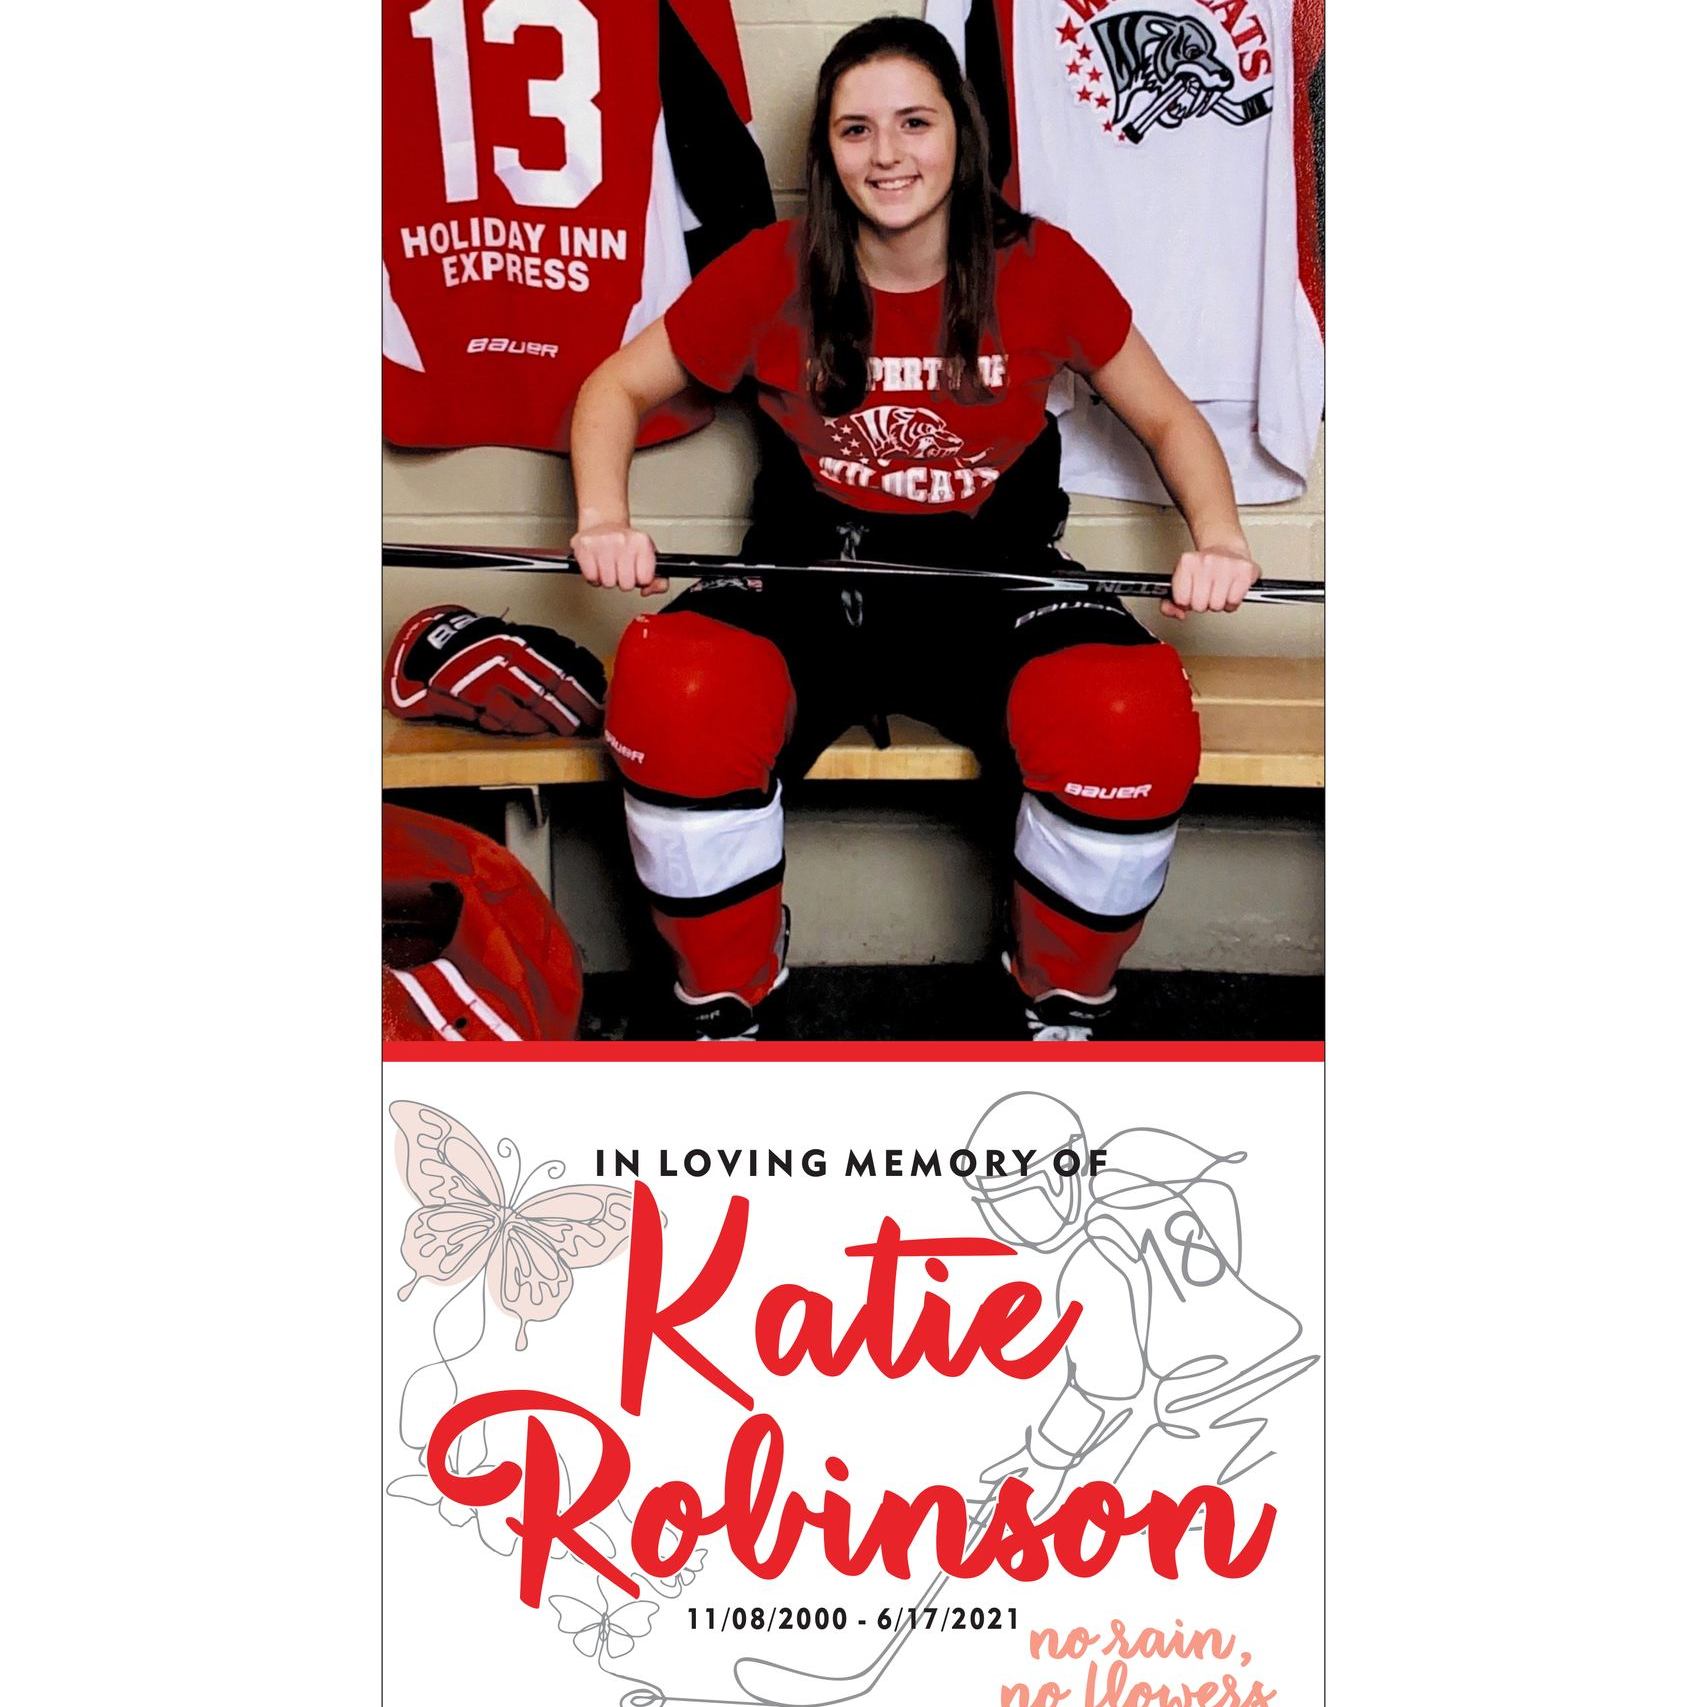 in memory of katie robinson